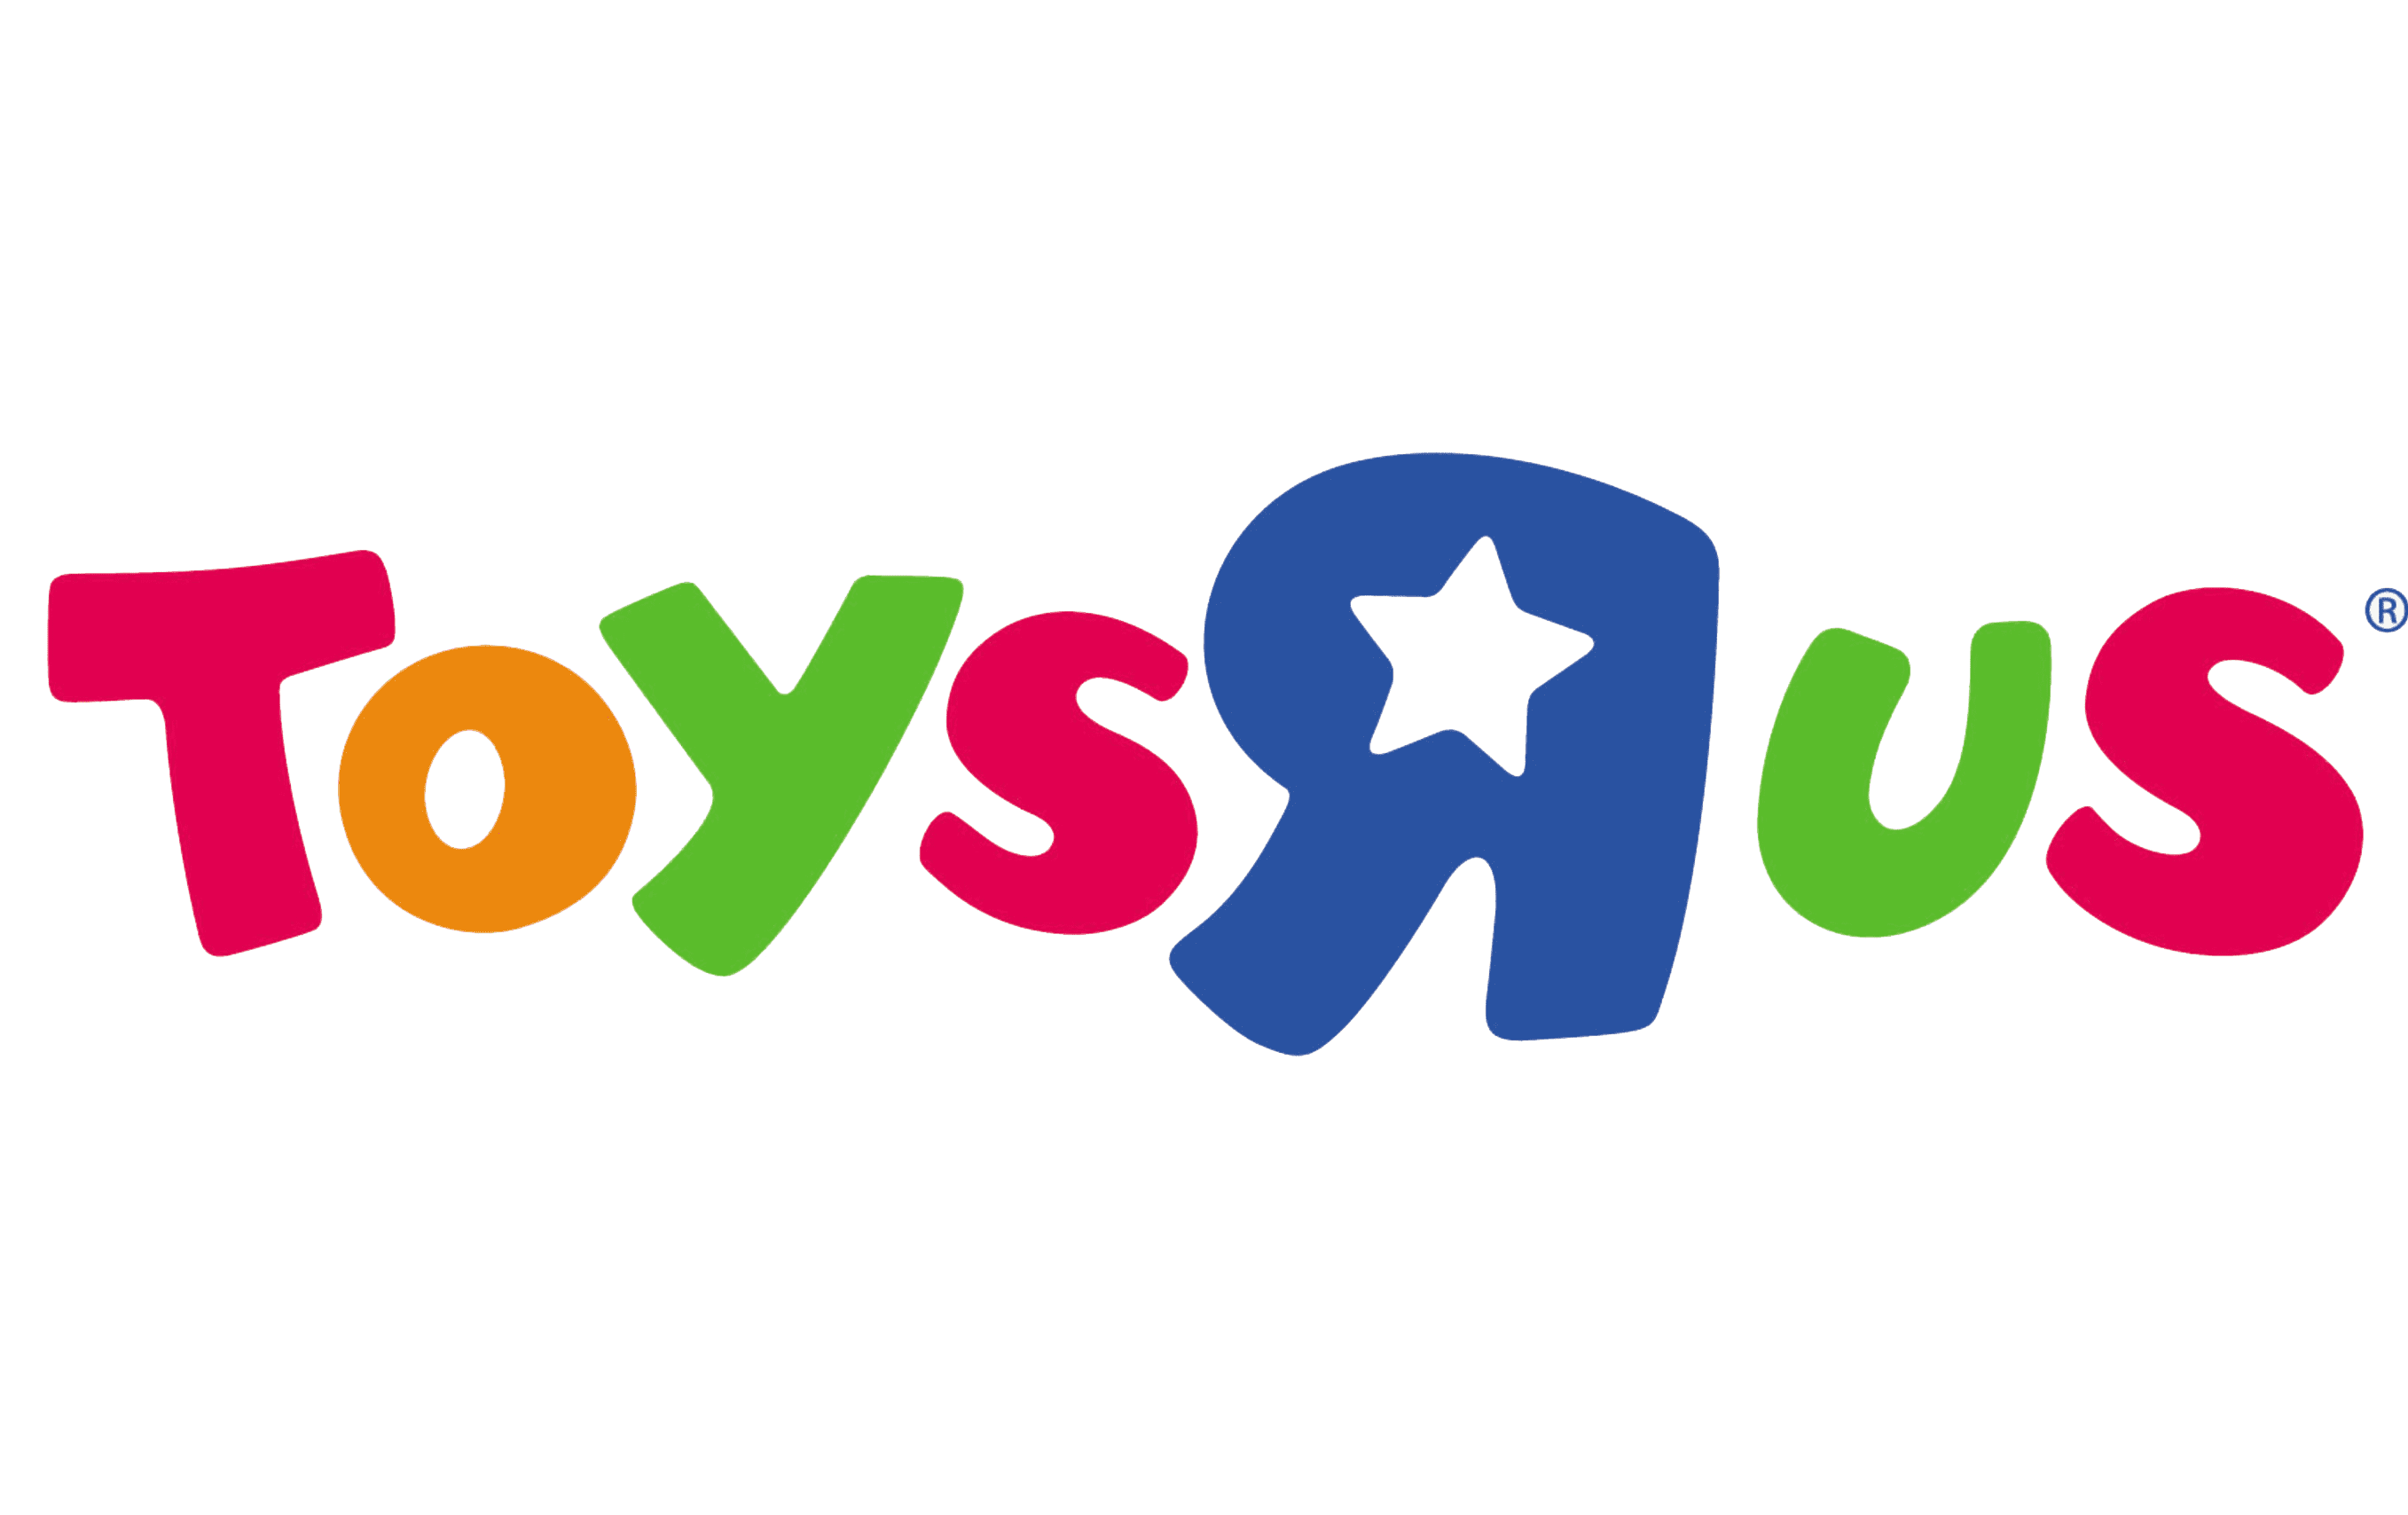 The Toys R Us logo, the version with the star inside the backwards R